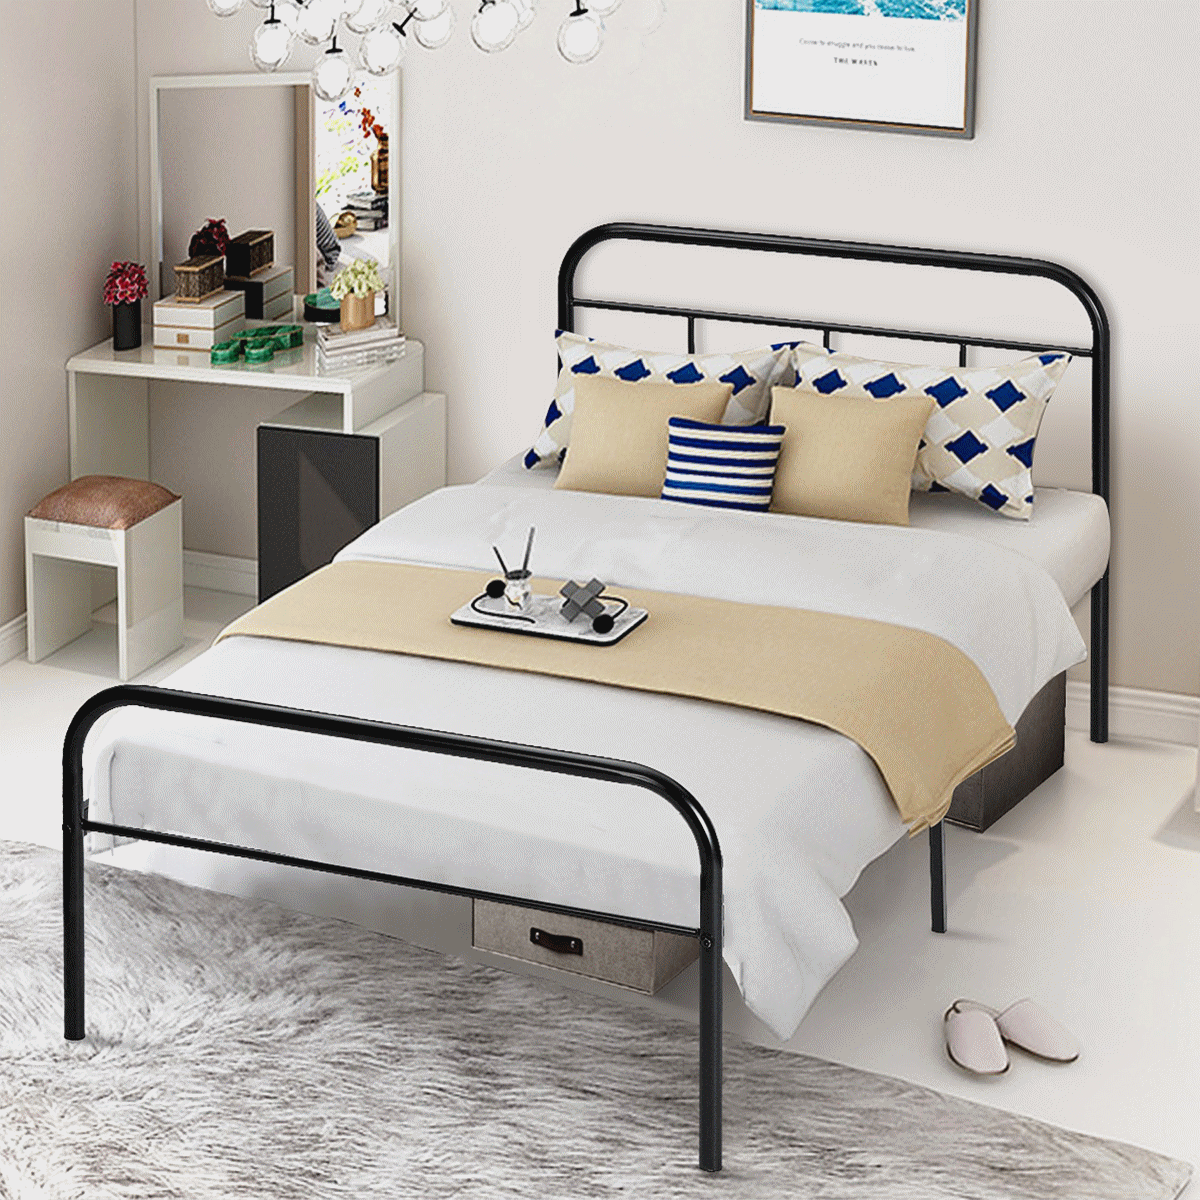 Snailhome Twin Size Metal Bed Frame Heavy Duty Platform Bed Frame No